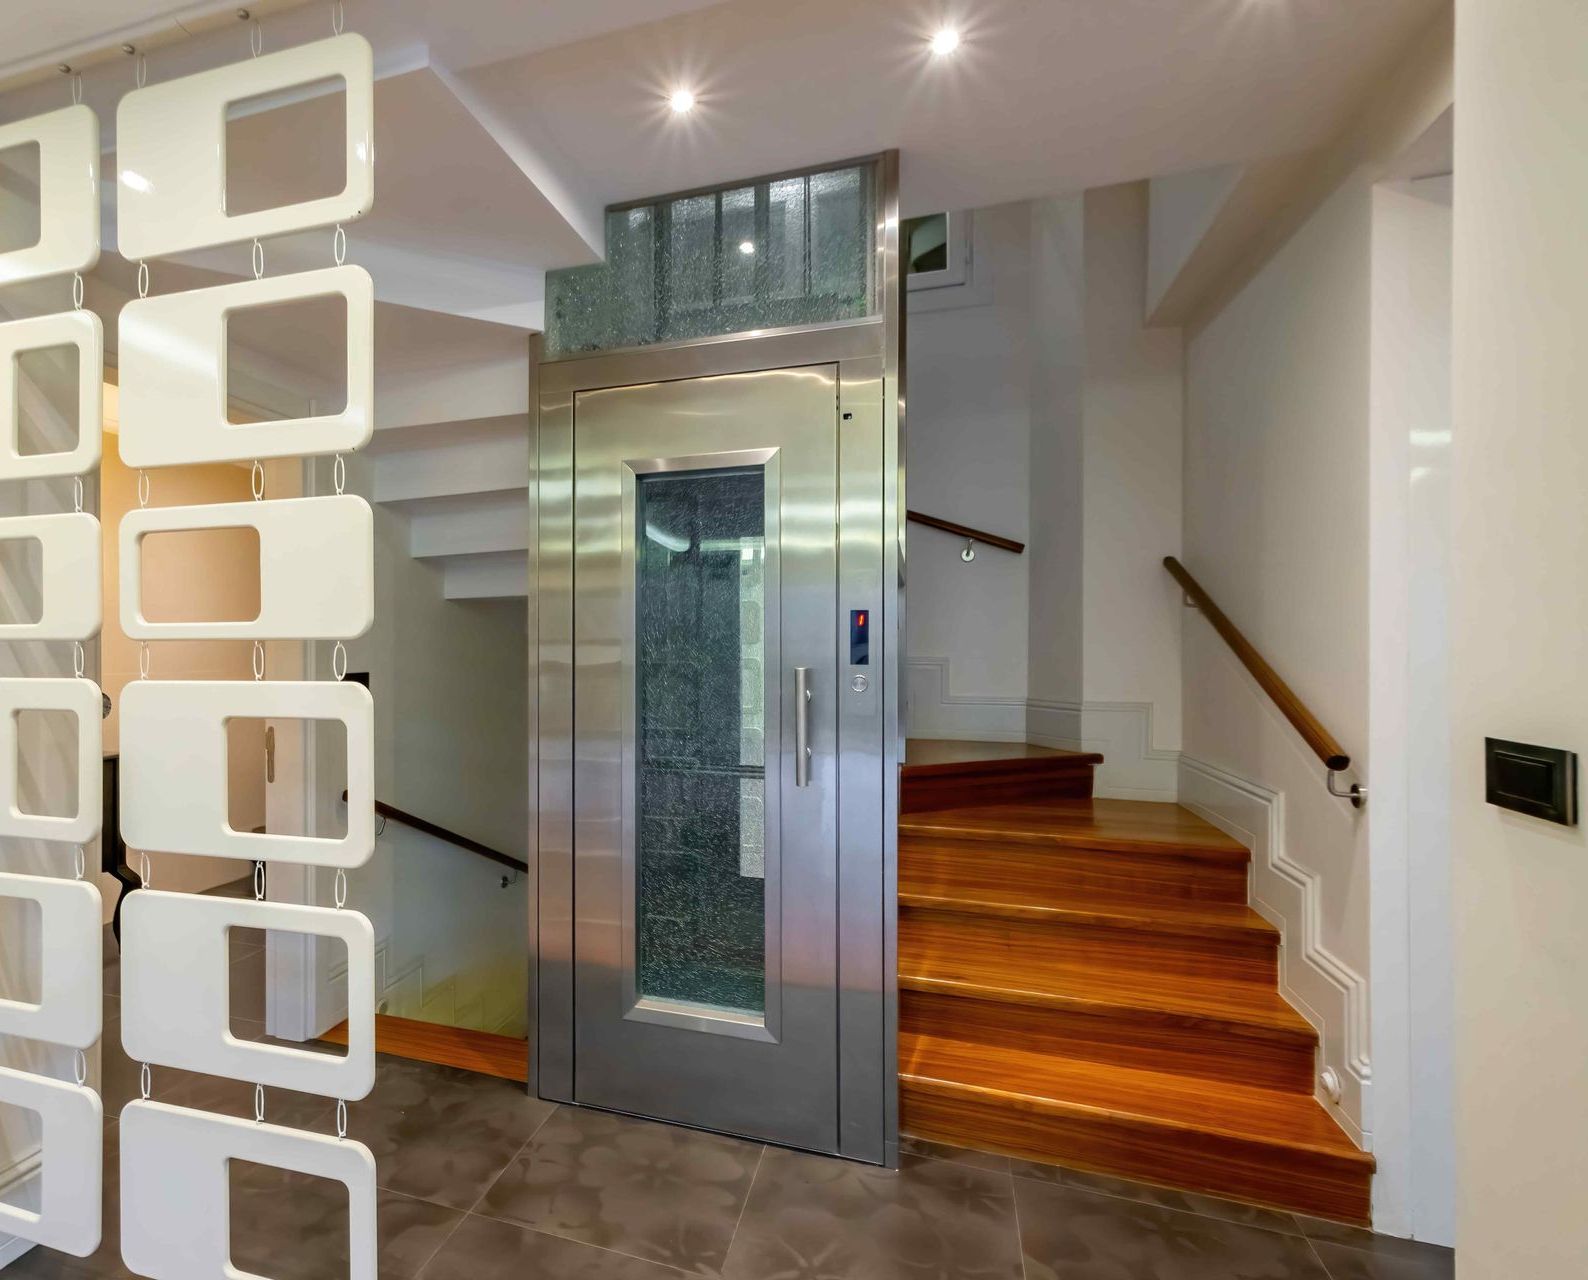 An elevator sets off the staircase area in a modern home.